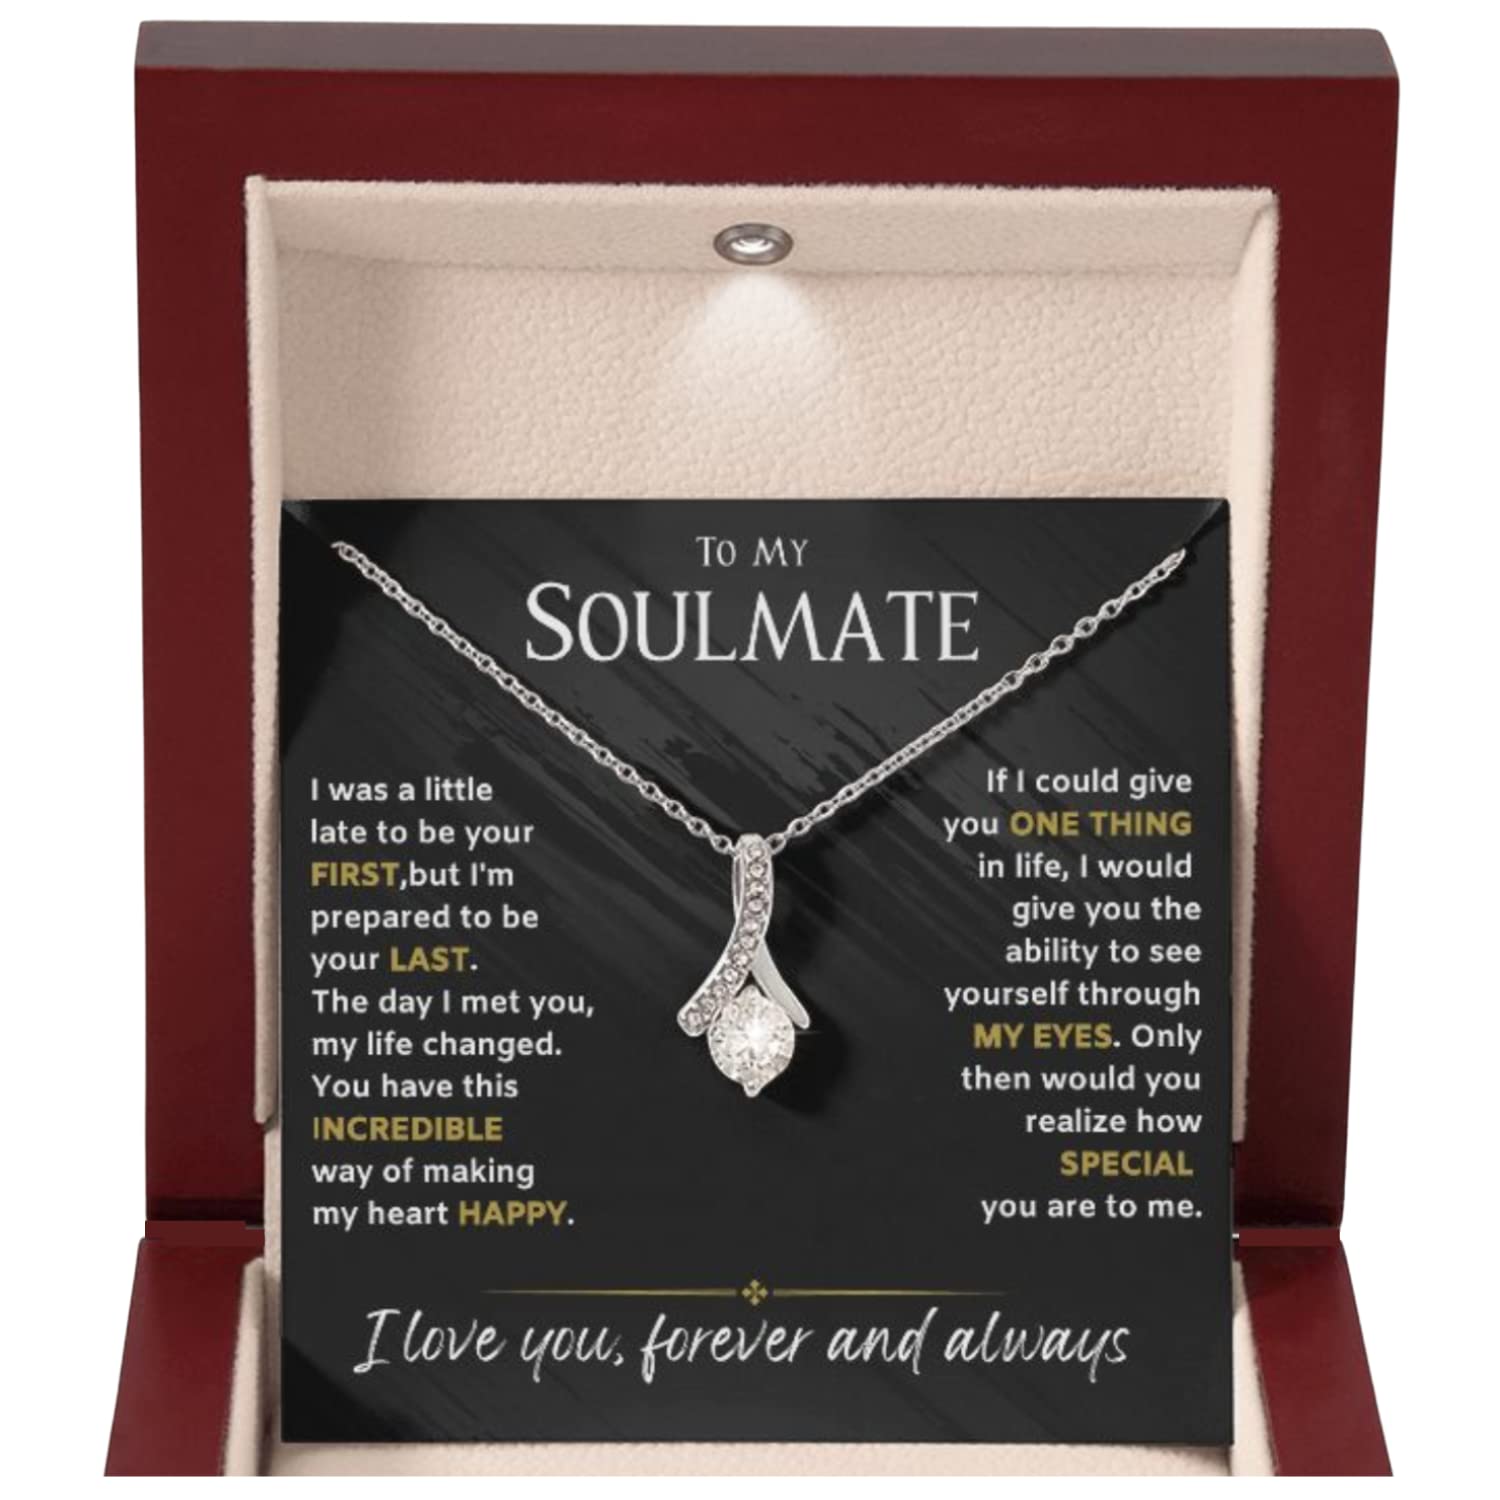 ROMESIA To My Soulmate Necklace For Women. Necklace for Girlfriend or To My Wife Necklace, Necklaces for Women Select 14k White Gold finish, 18K Yellow finish or Rose Gold Finish. Gifts for Girlfriend Romantic.